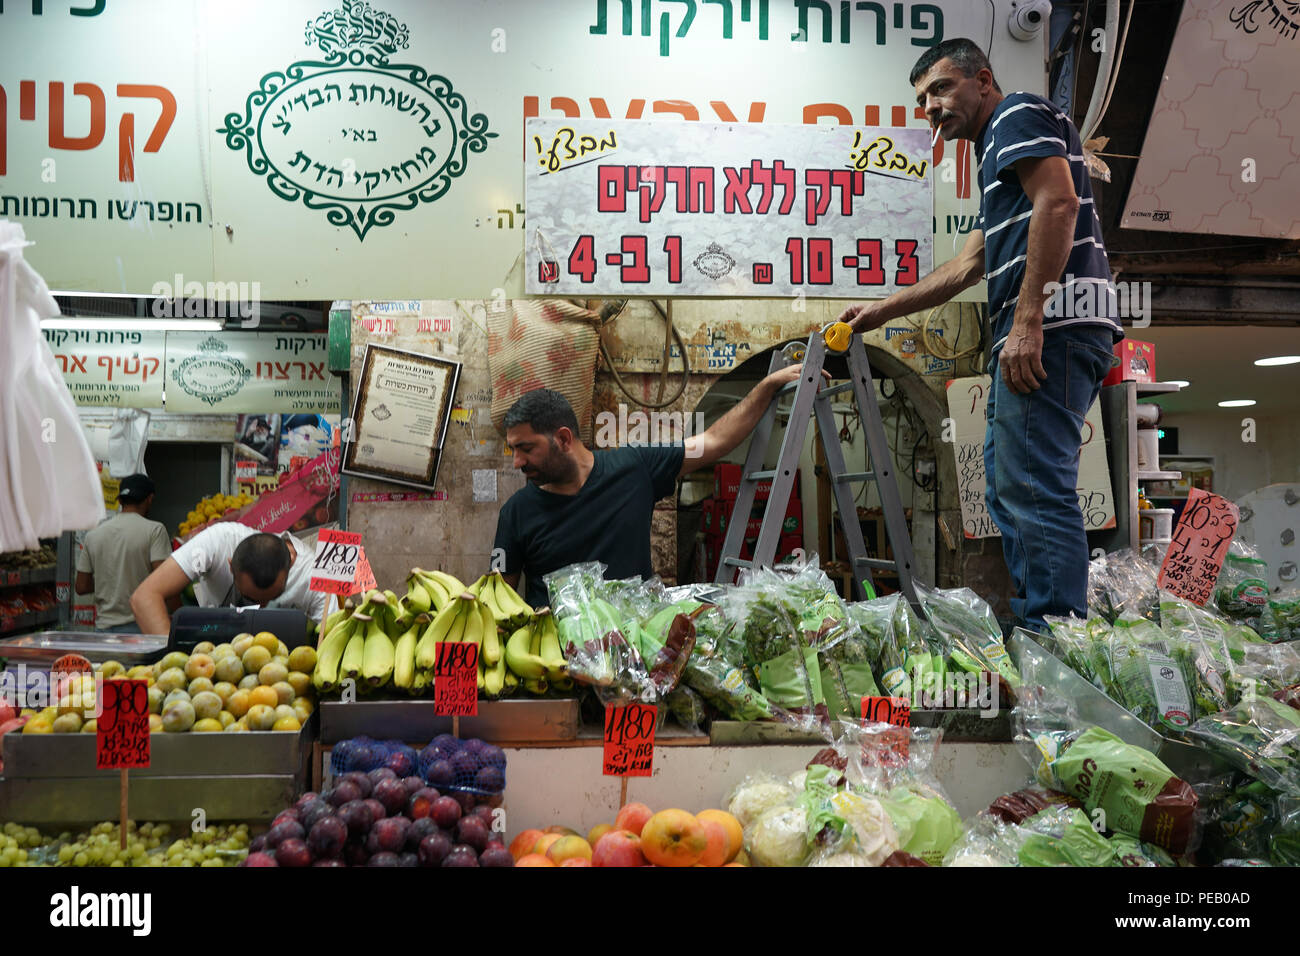 Machane Yehuda market in Jewish west Jerusalem. From a series of travel photos taken in Jerusalem and nearby areas. Photo date: Monday, July 30, 2018. Stock Photo